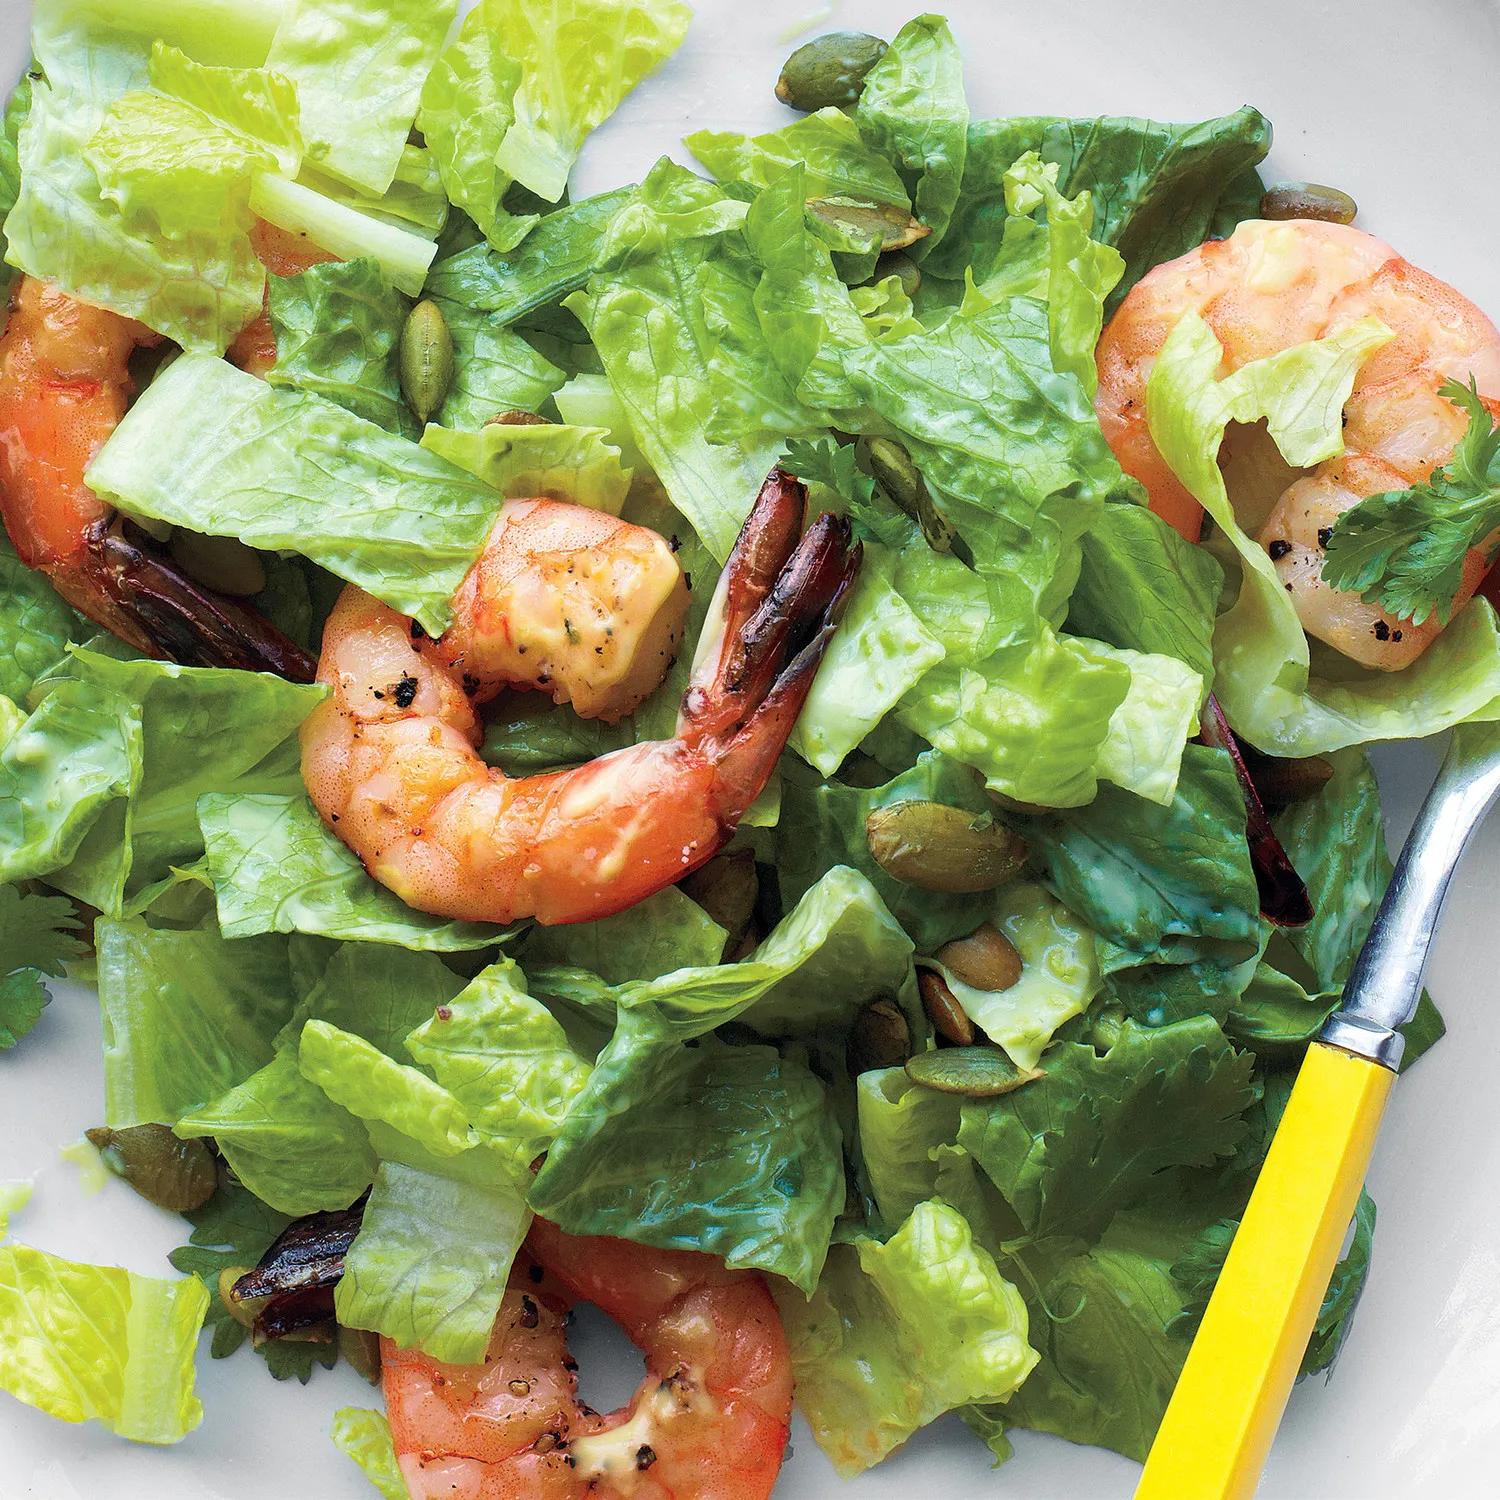 Shrimp Salad Recipes That Will Amp Up Your Greens | Martha Stewart